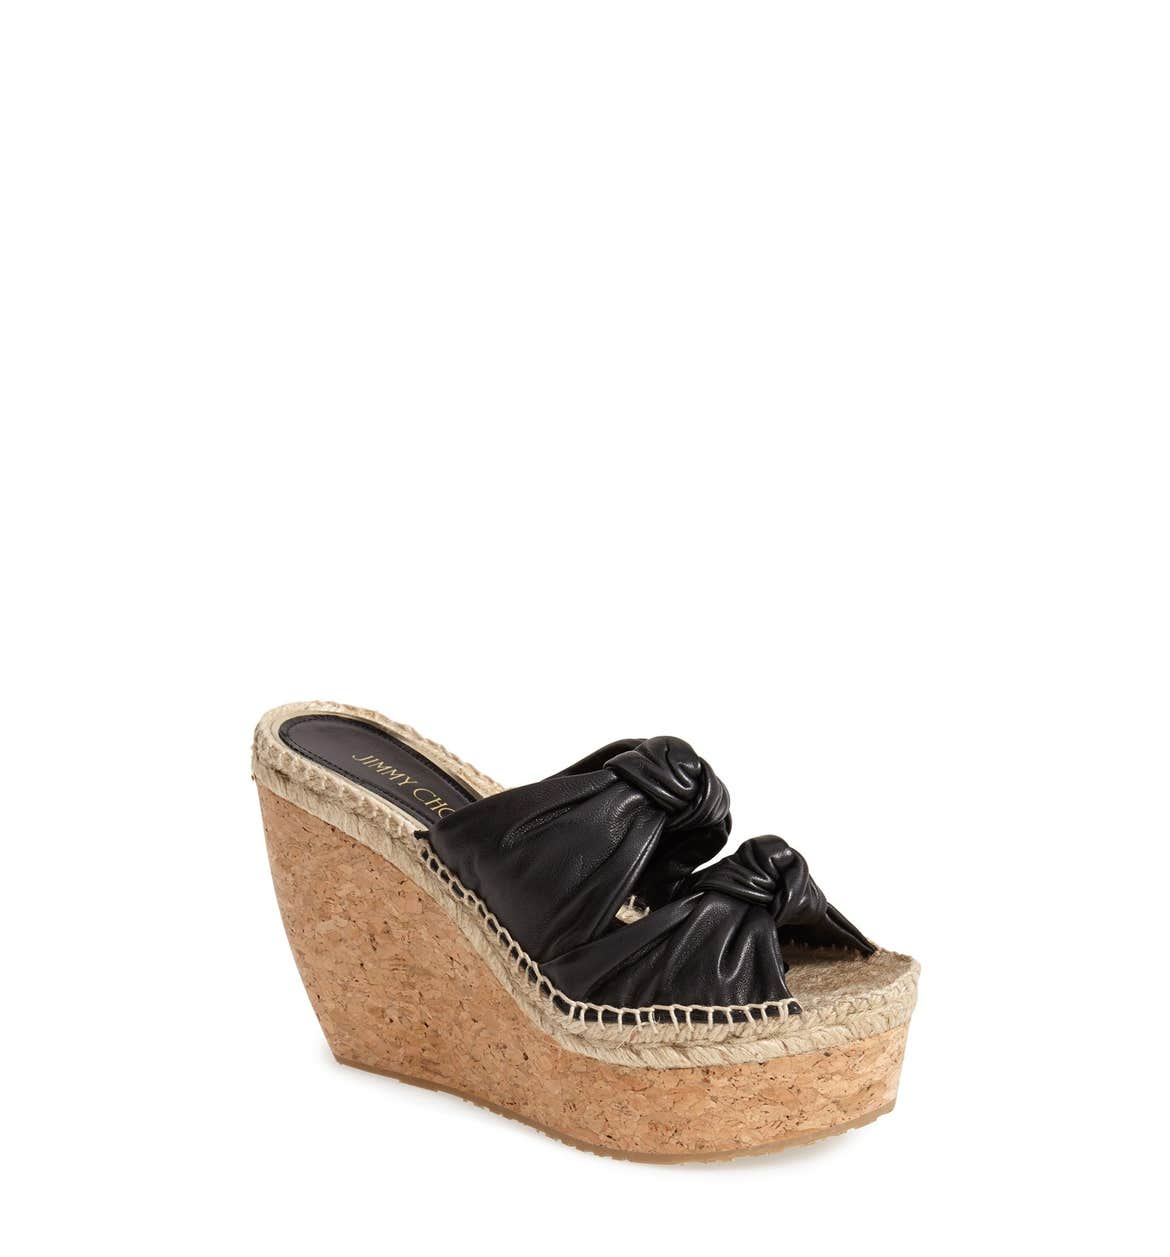 Jimmy Choo 'Priory' Knotted Double Band Wedge (Women) | Nordstrom